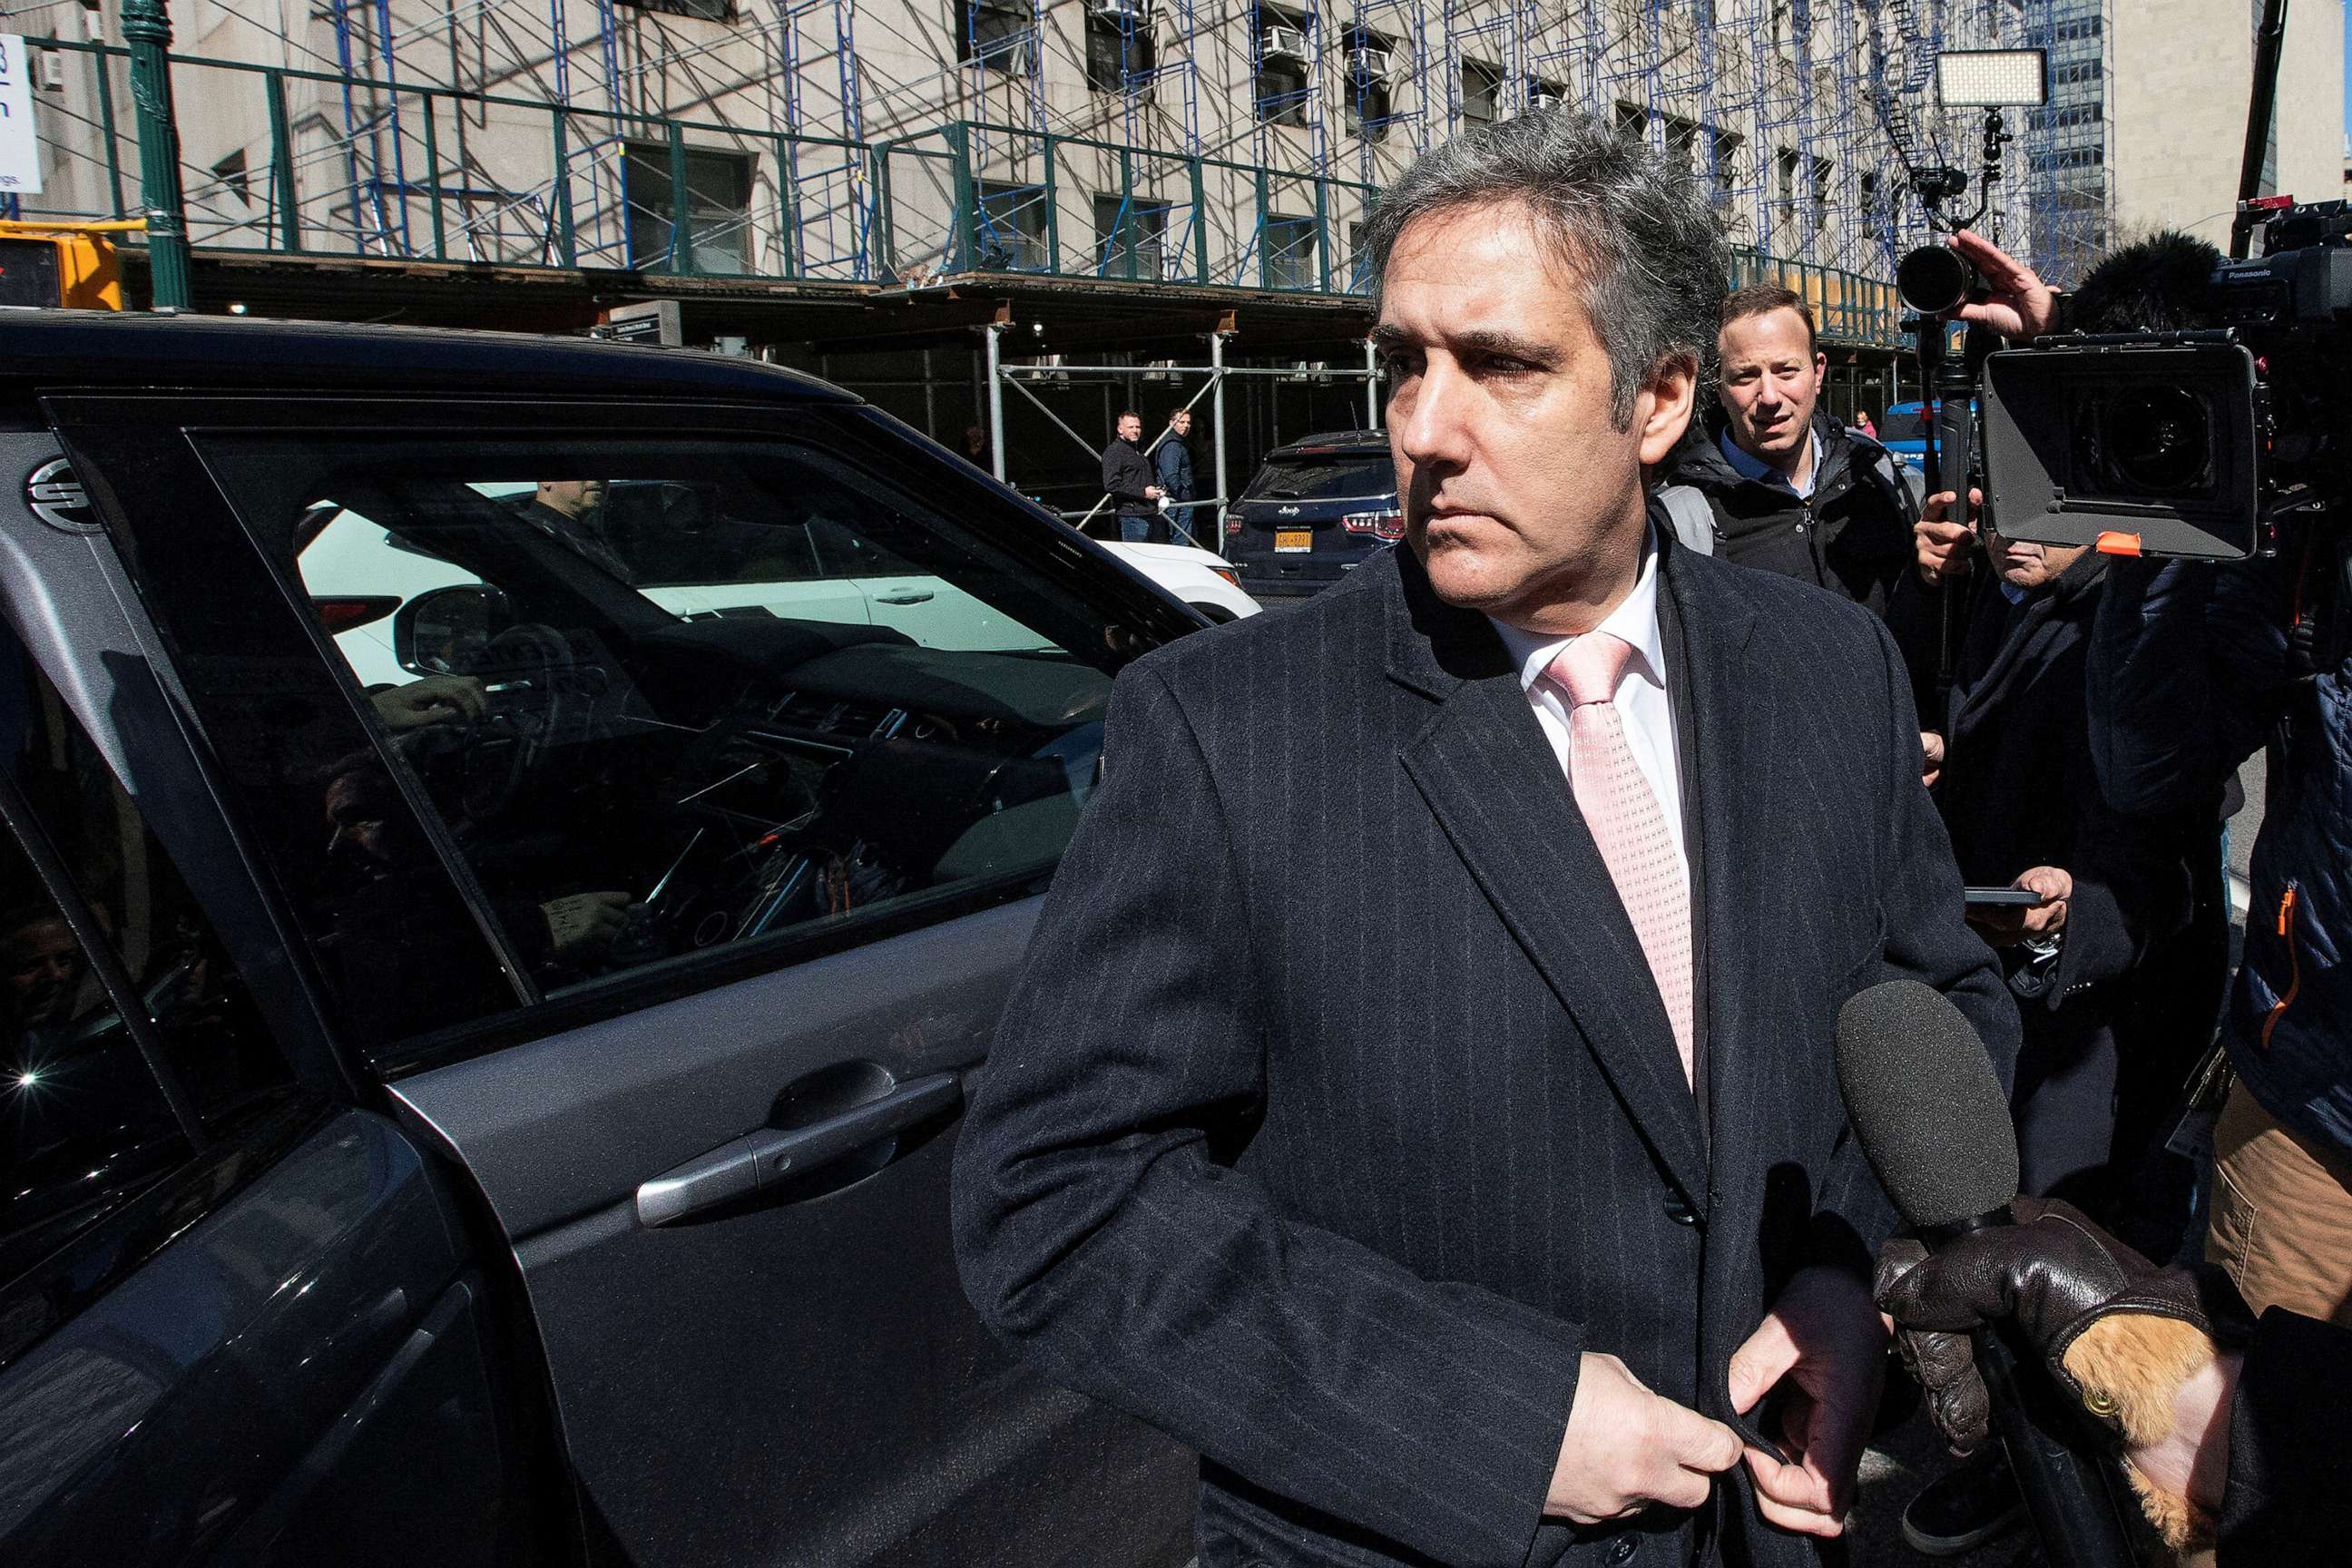 PHOTO: Michael Cohen, former attorney for former President Donald Trump, arrives to the New York Courthouse on March 15, 2023, in New York.